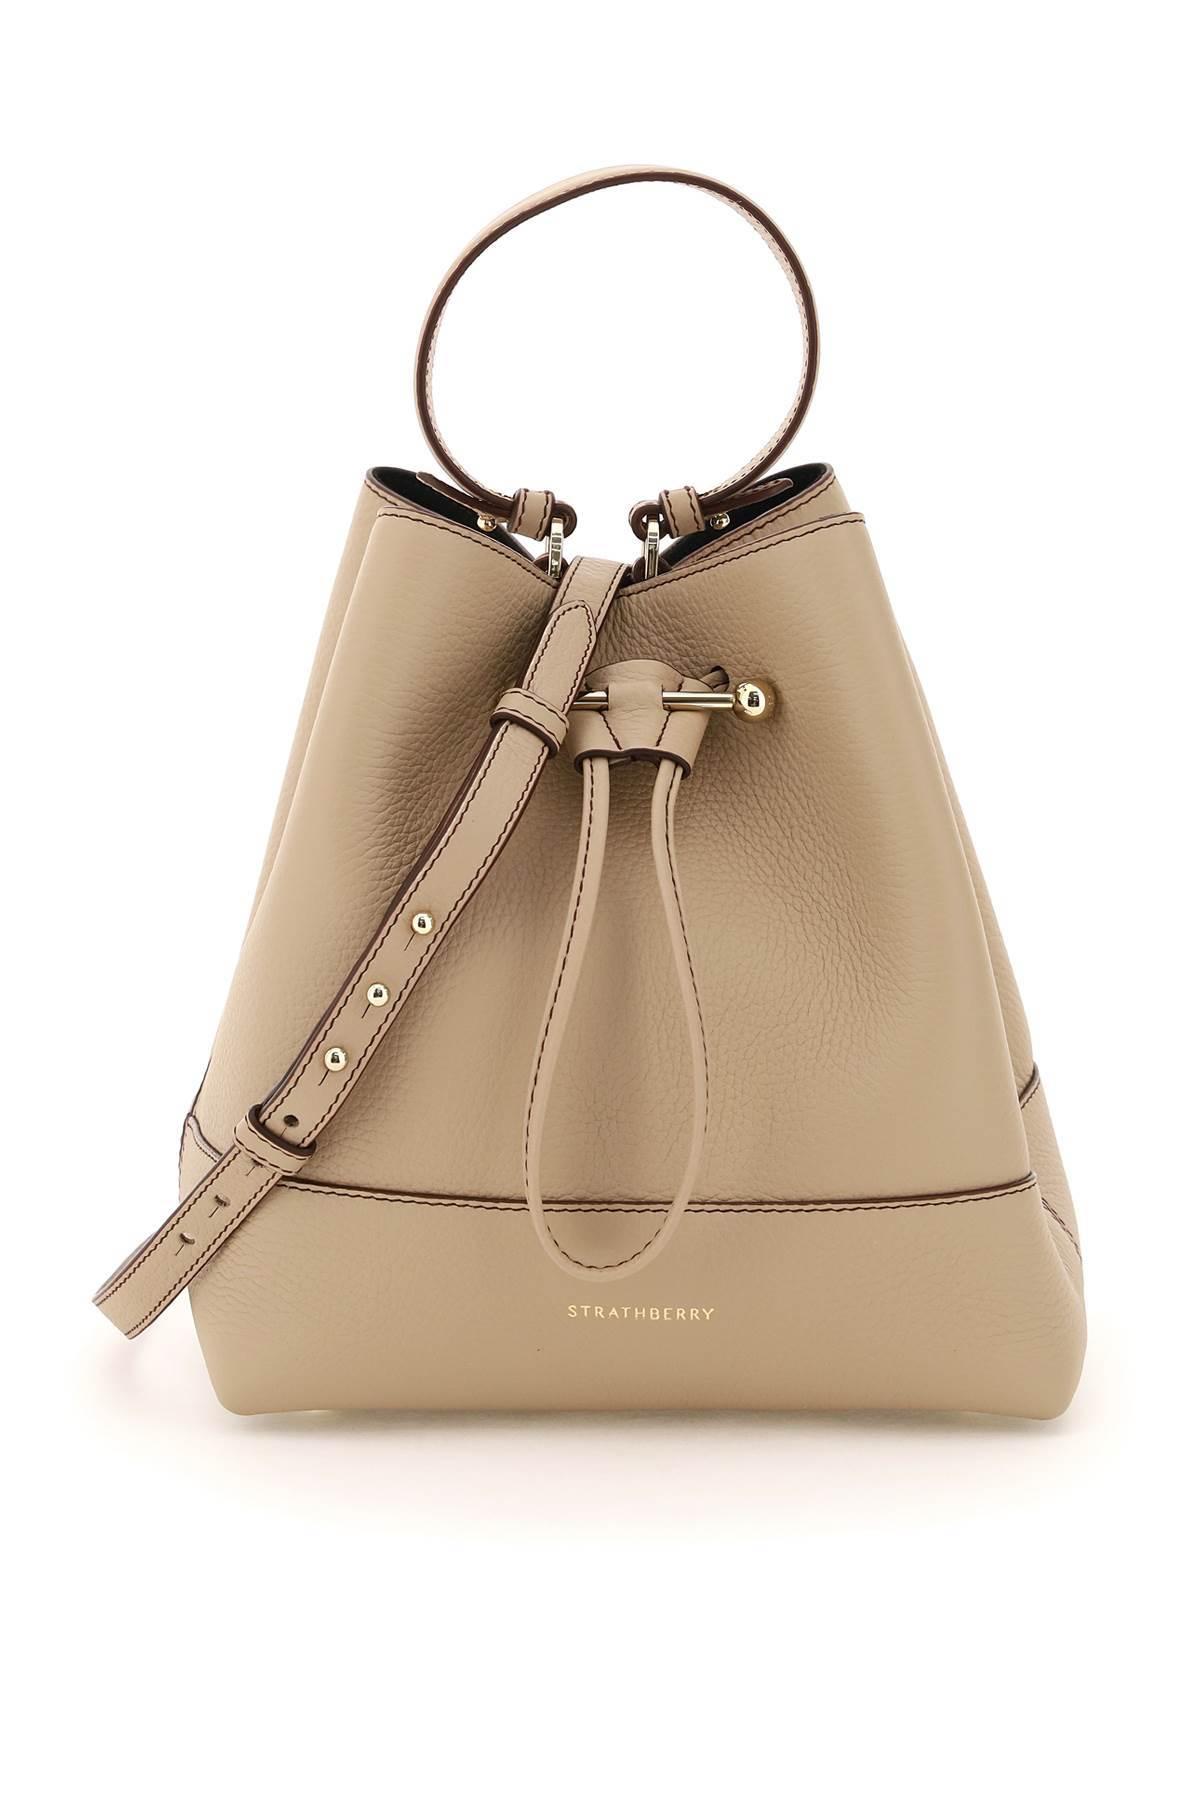 Strathberry Leather Midi Lana Osette Bucket Bag - Brown - One Size